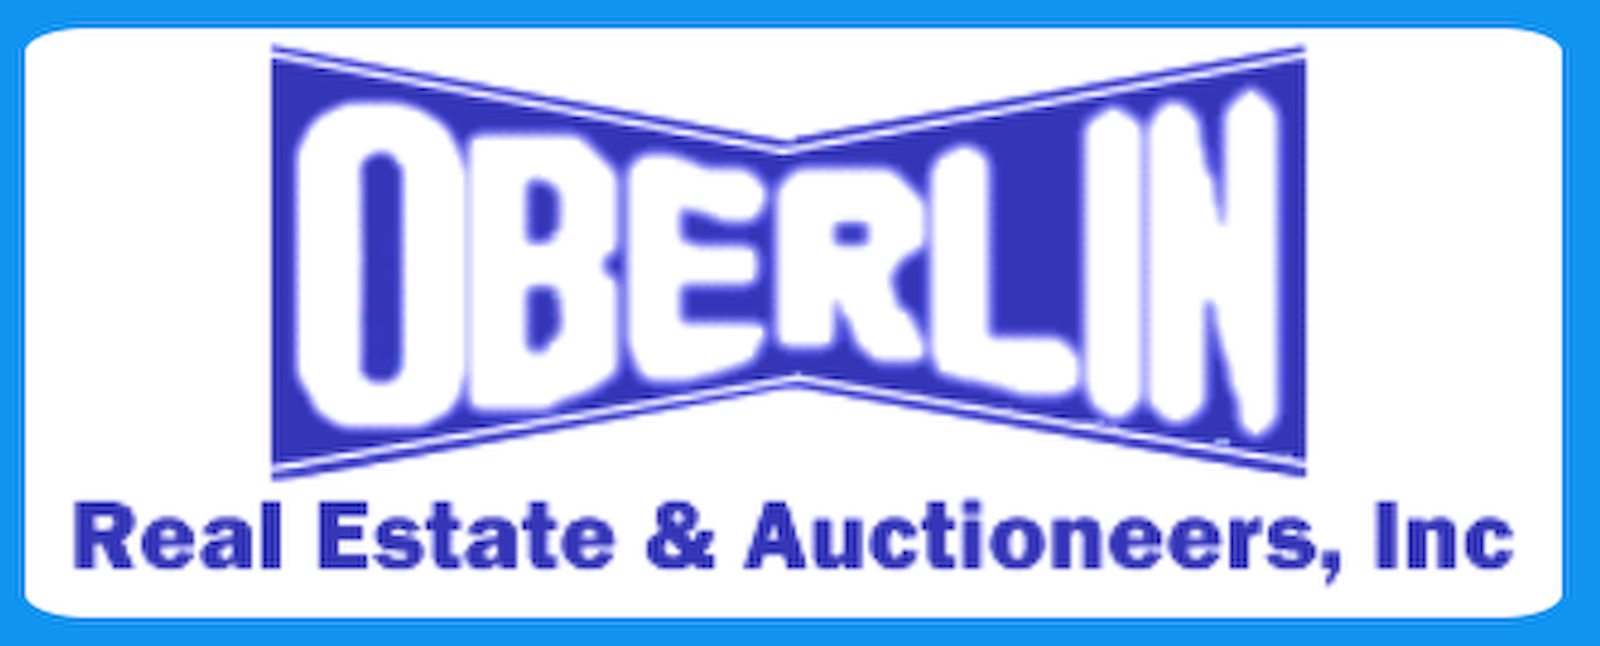 Oberlin Real Estate & Auctioneers, Inc.